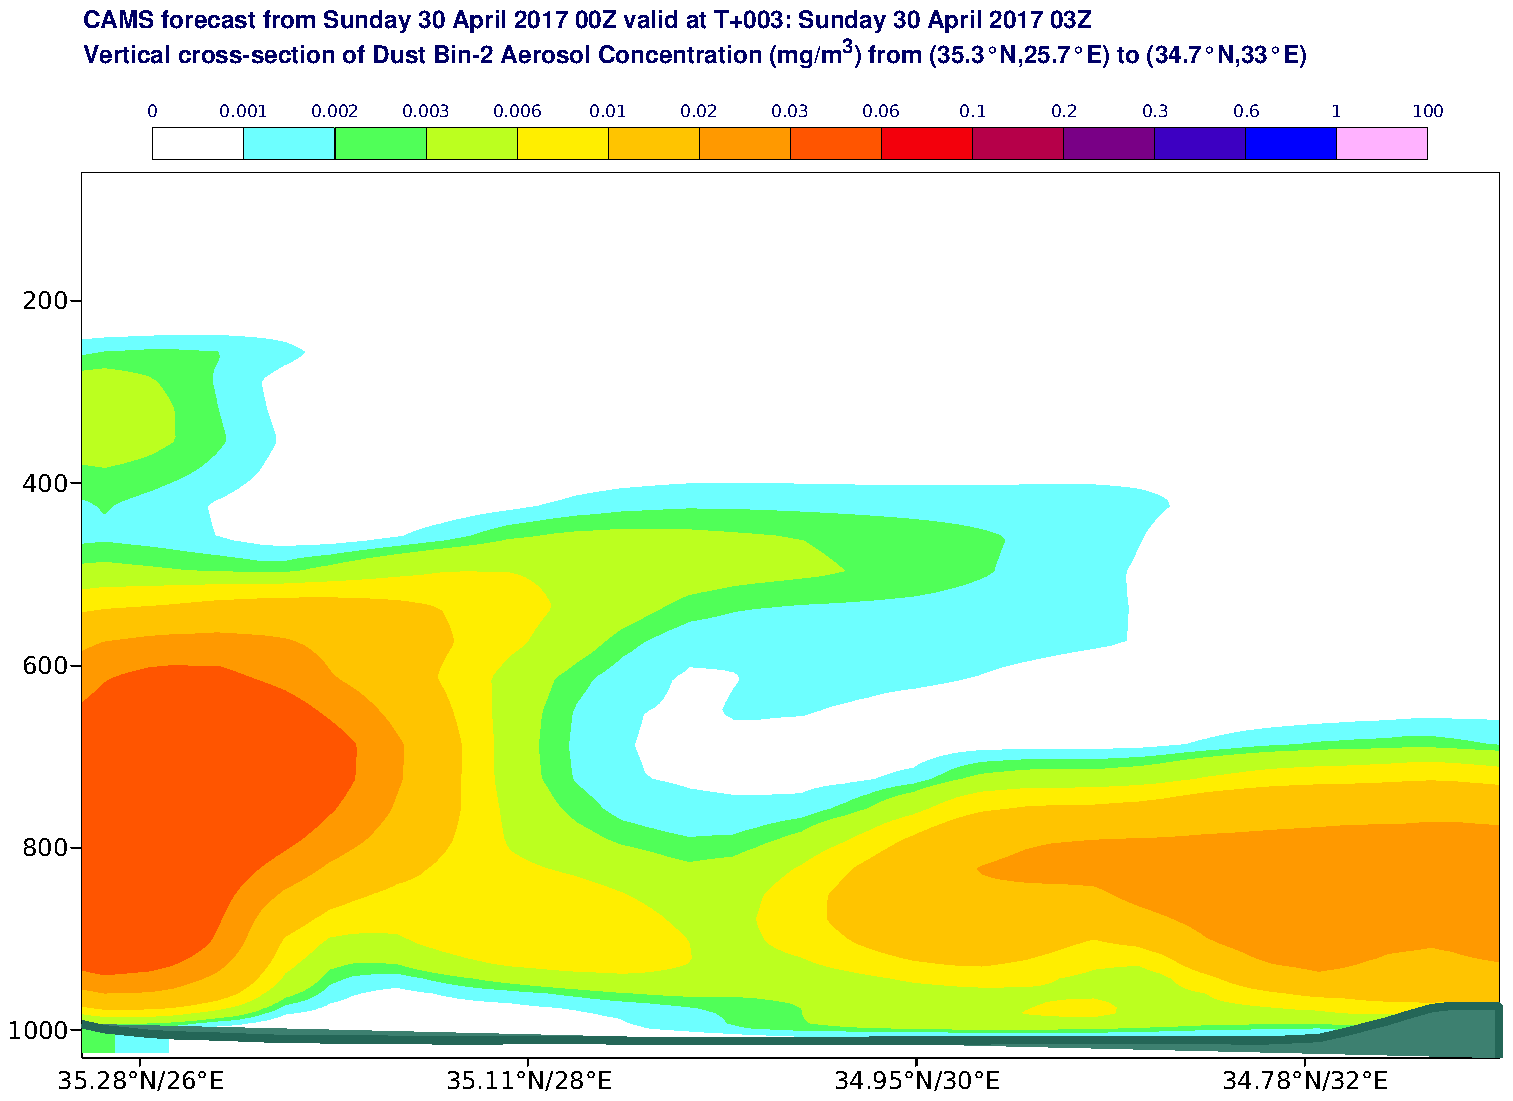 Vertical cross-section of Dust Bin-2 Aerosol Concentration (mg/m3) valid at T3 - 2017-04-30 03:00